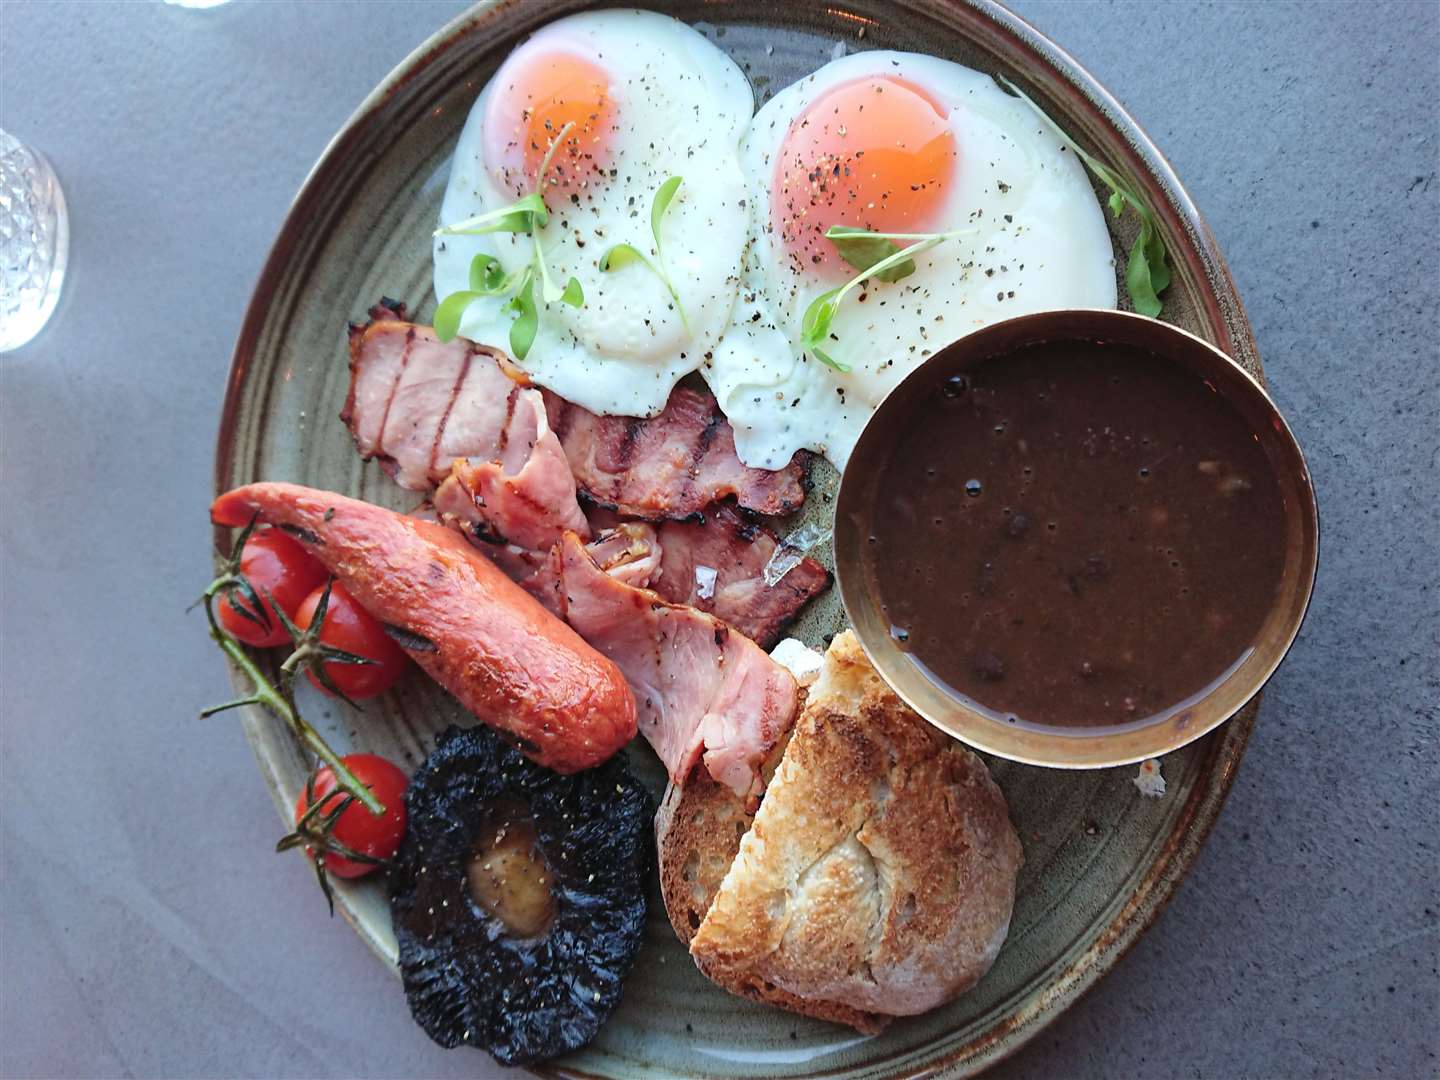 The delicious fry-up at the Treehouse London